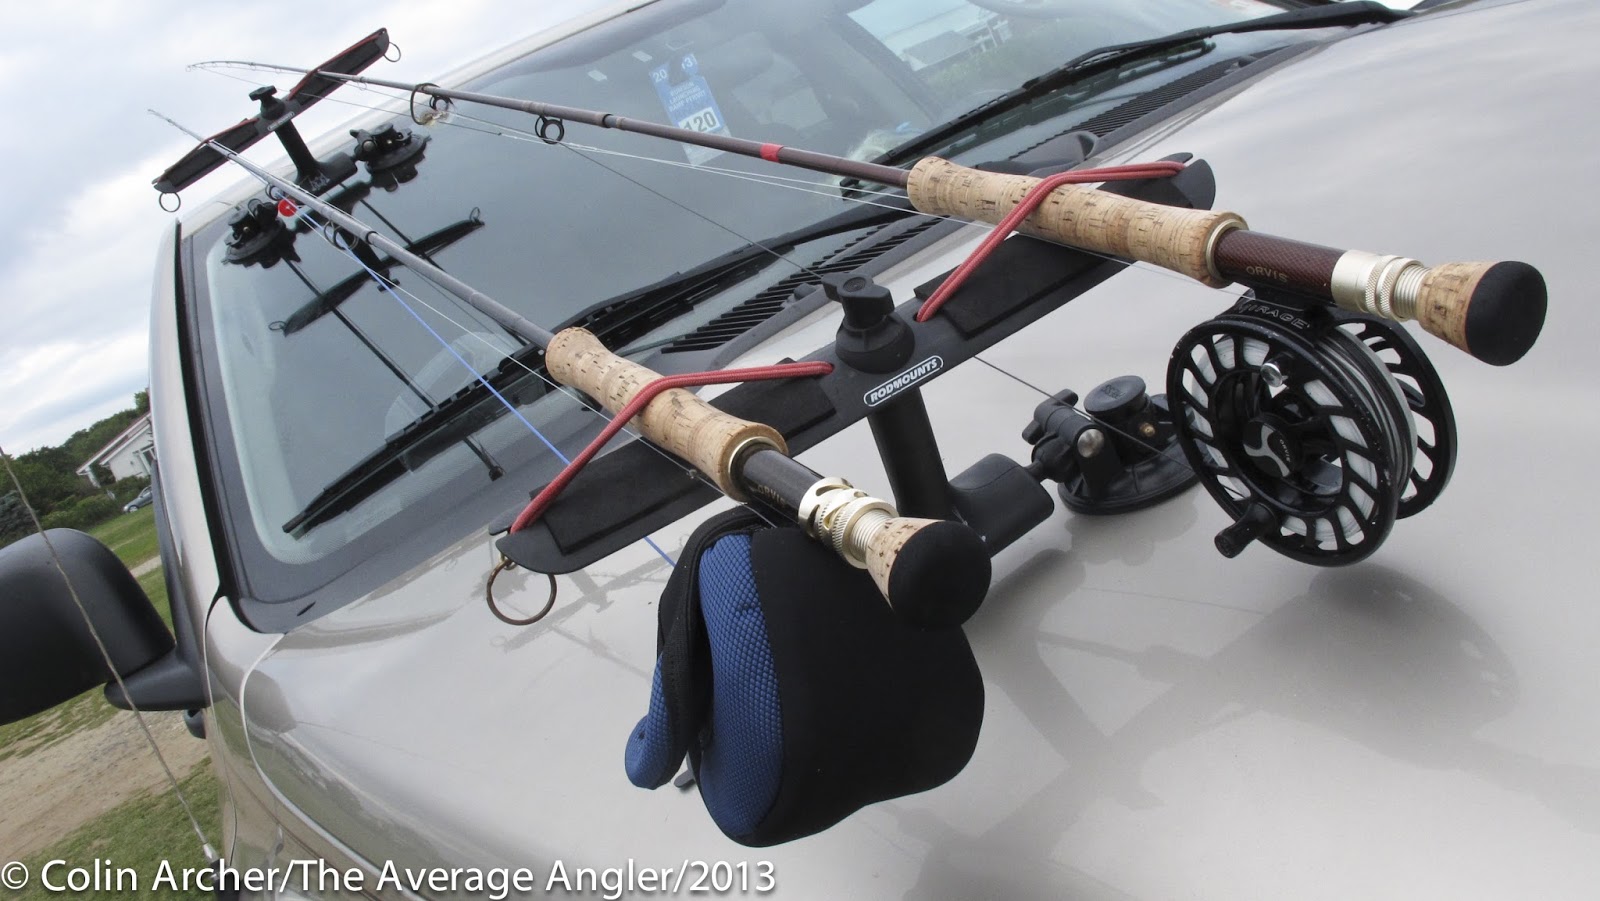 The Average Angler: 12.14.13 I was a day late in retrofitting my